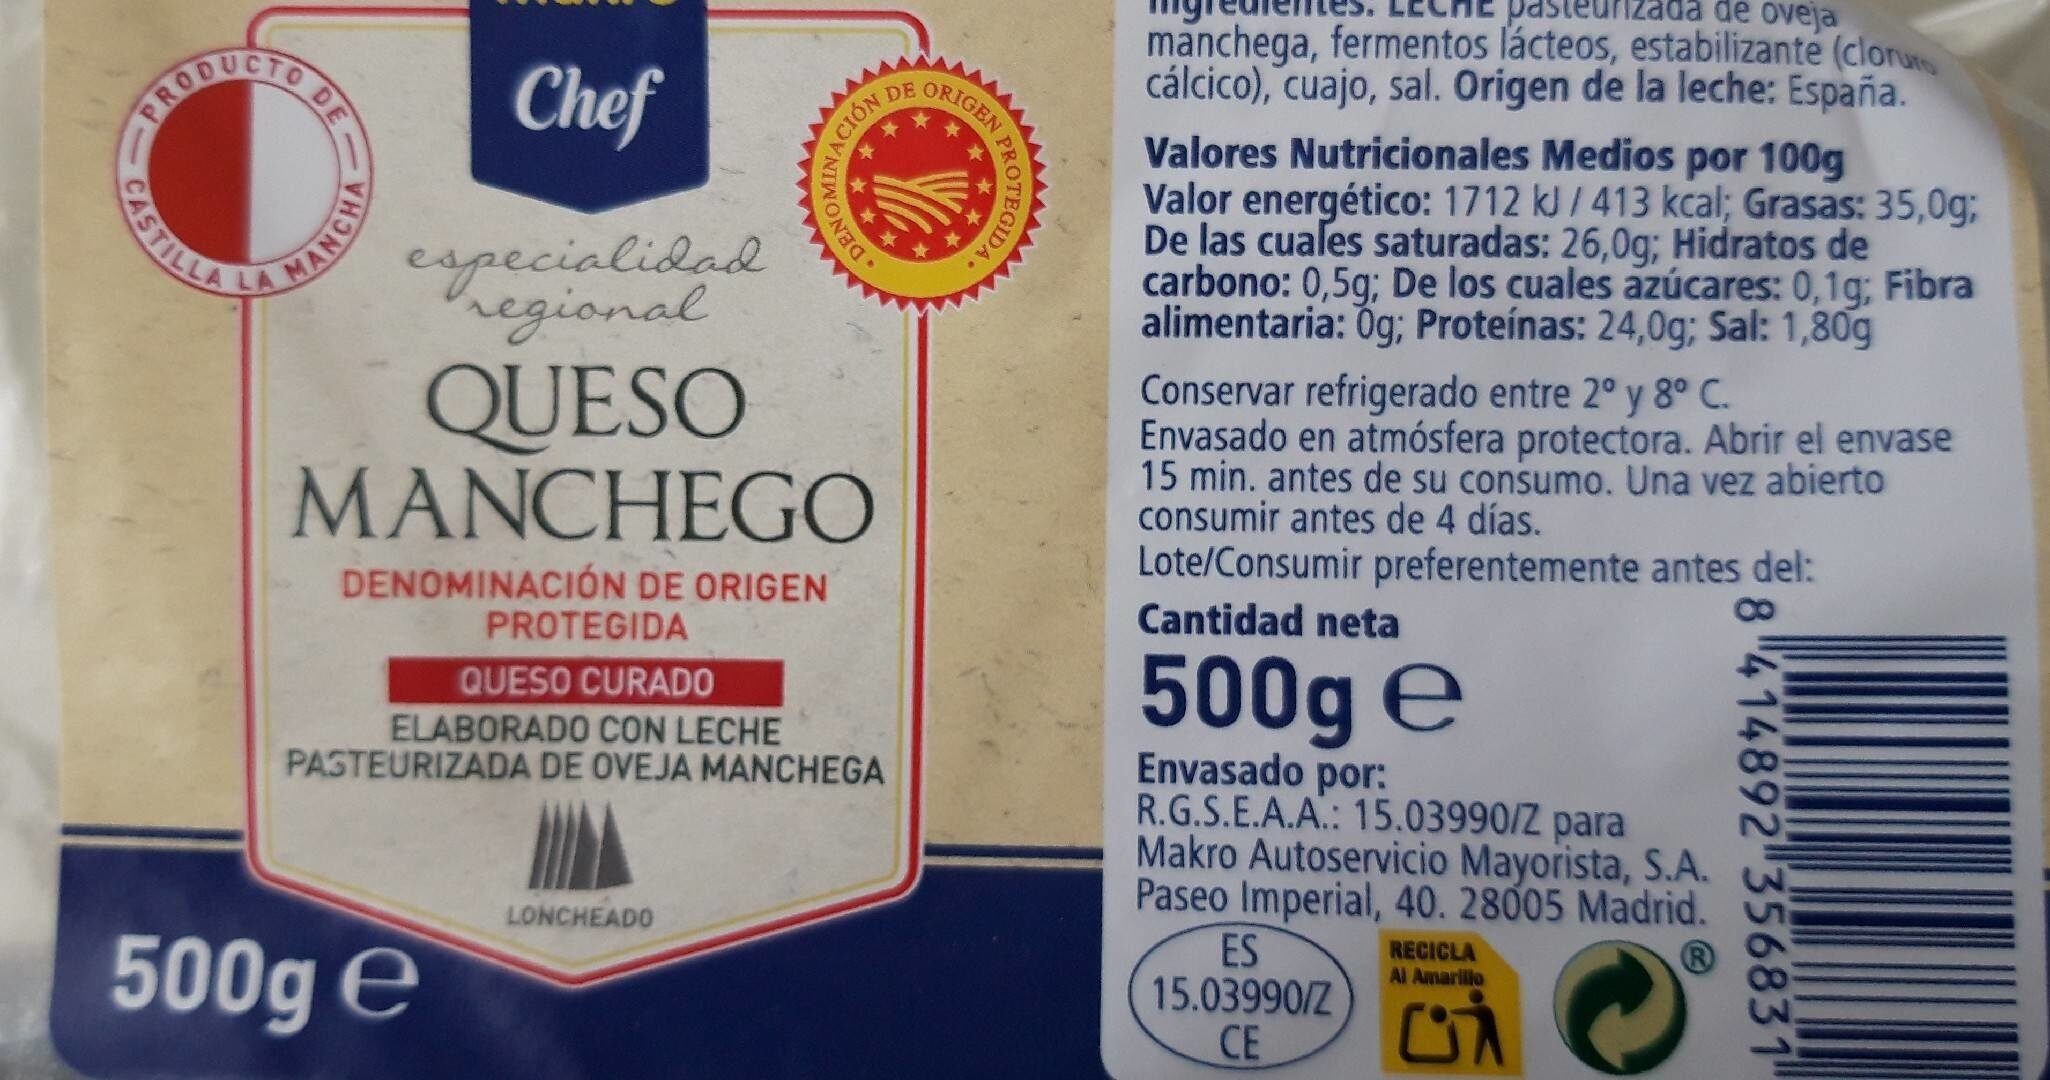 Queso manchego - Producto